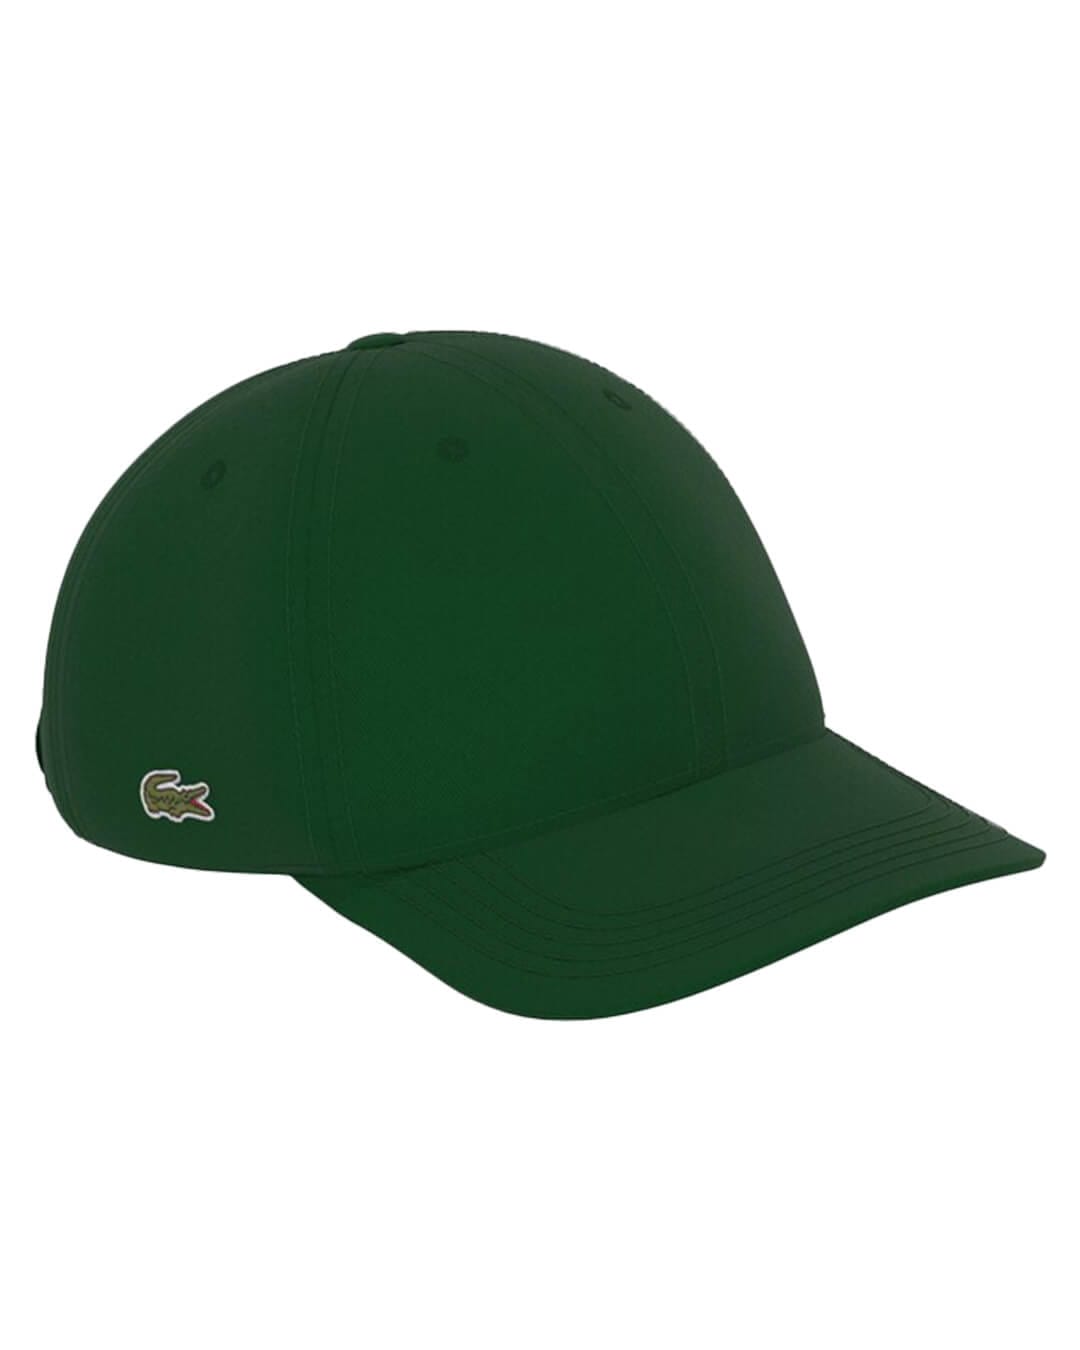 Lacoste Hats ONE SIZE Lacoste Unisex Organic Cotton Green Twill Cap